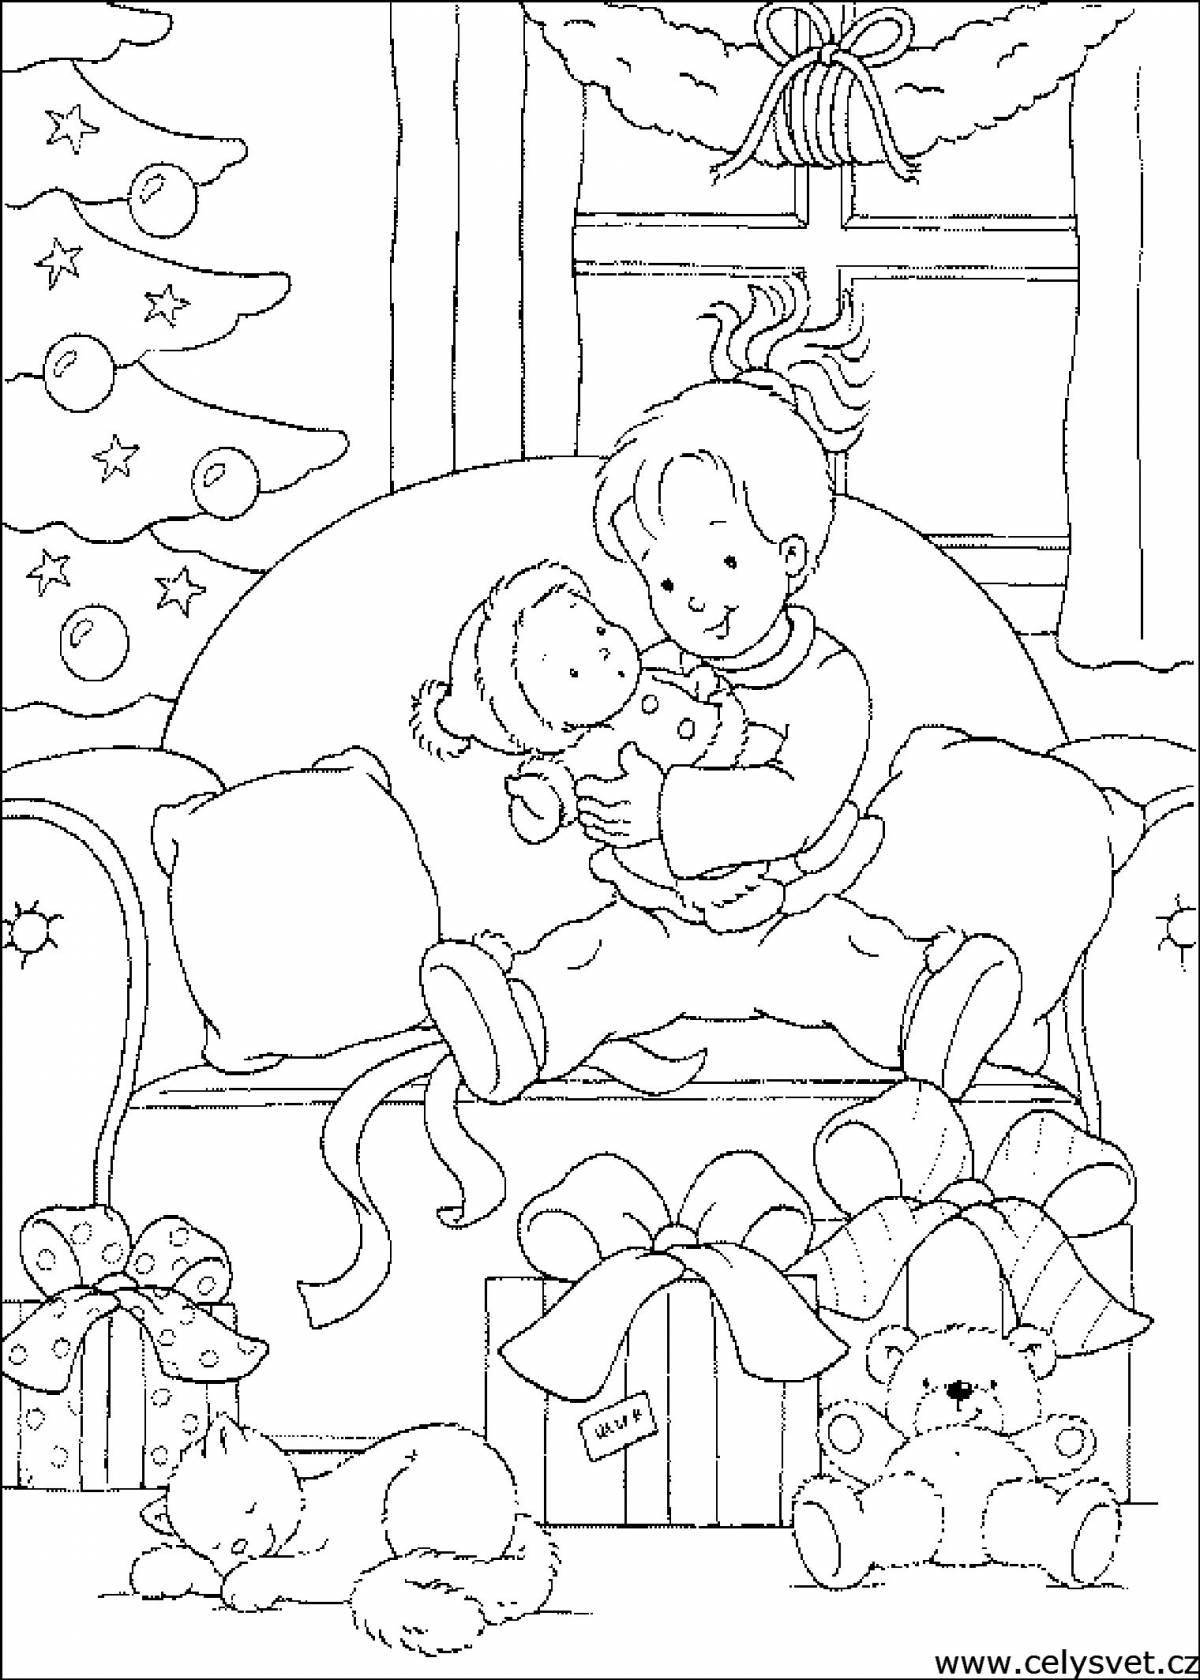 Children's Christmas sparkle coloring book